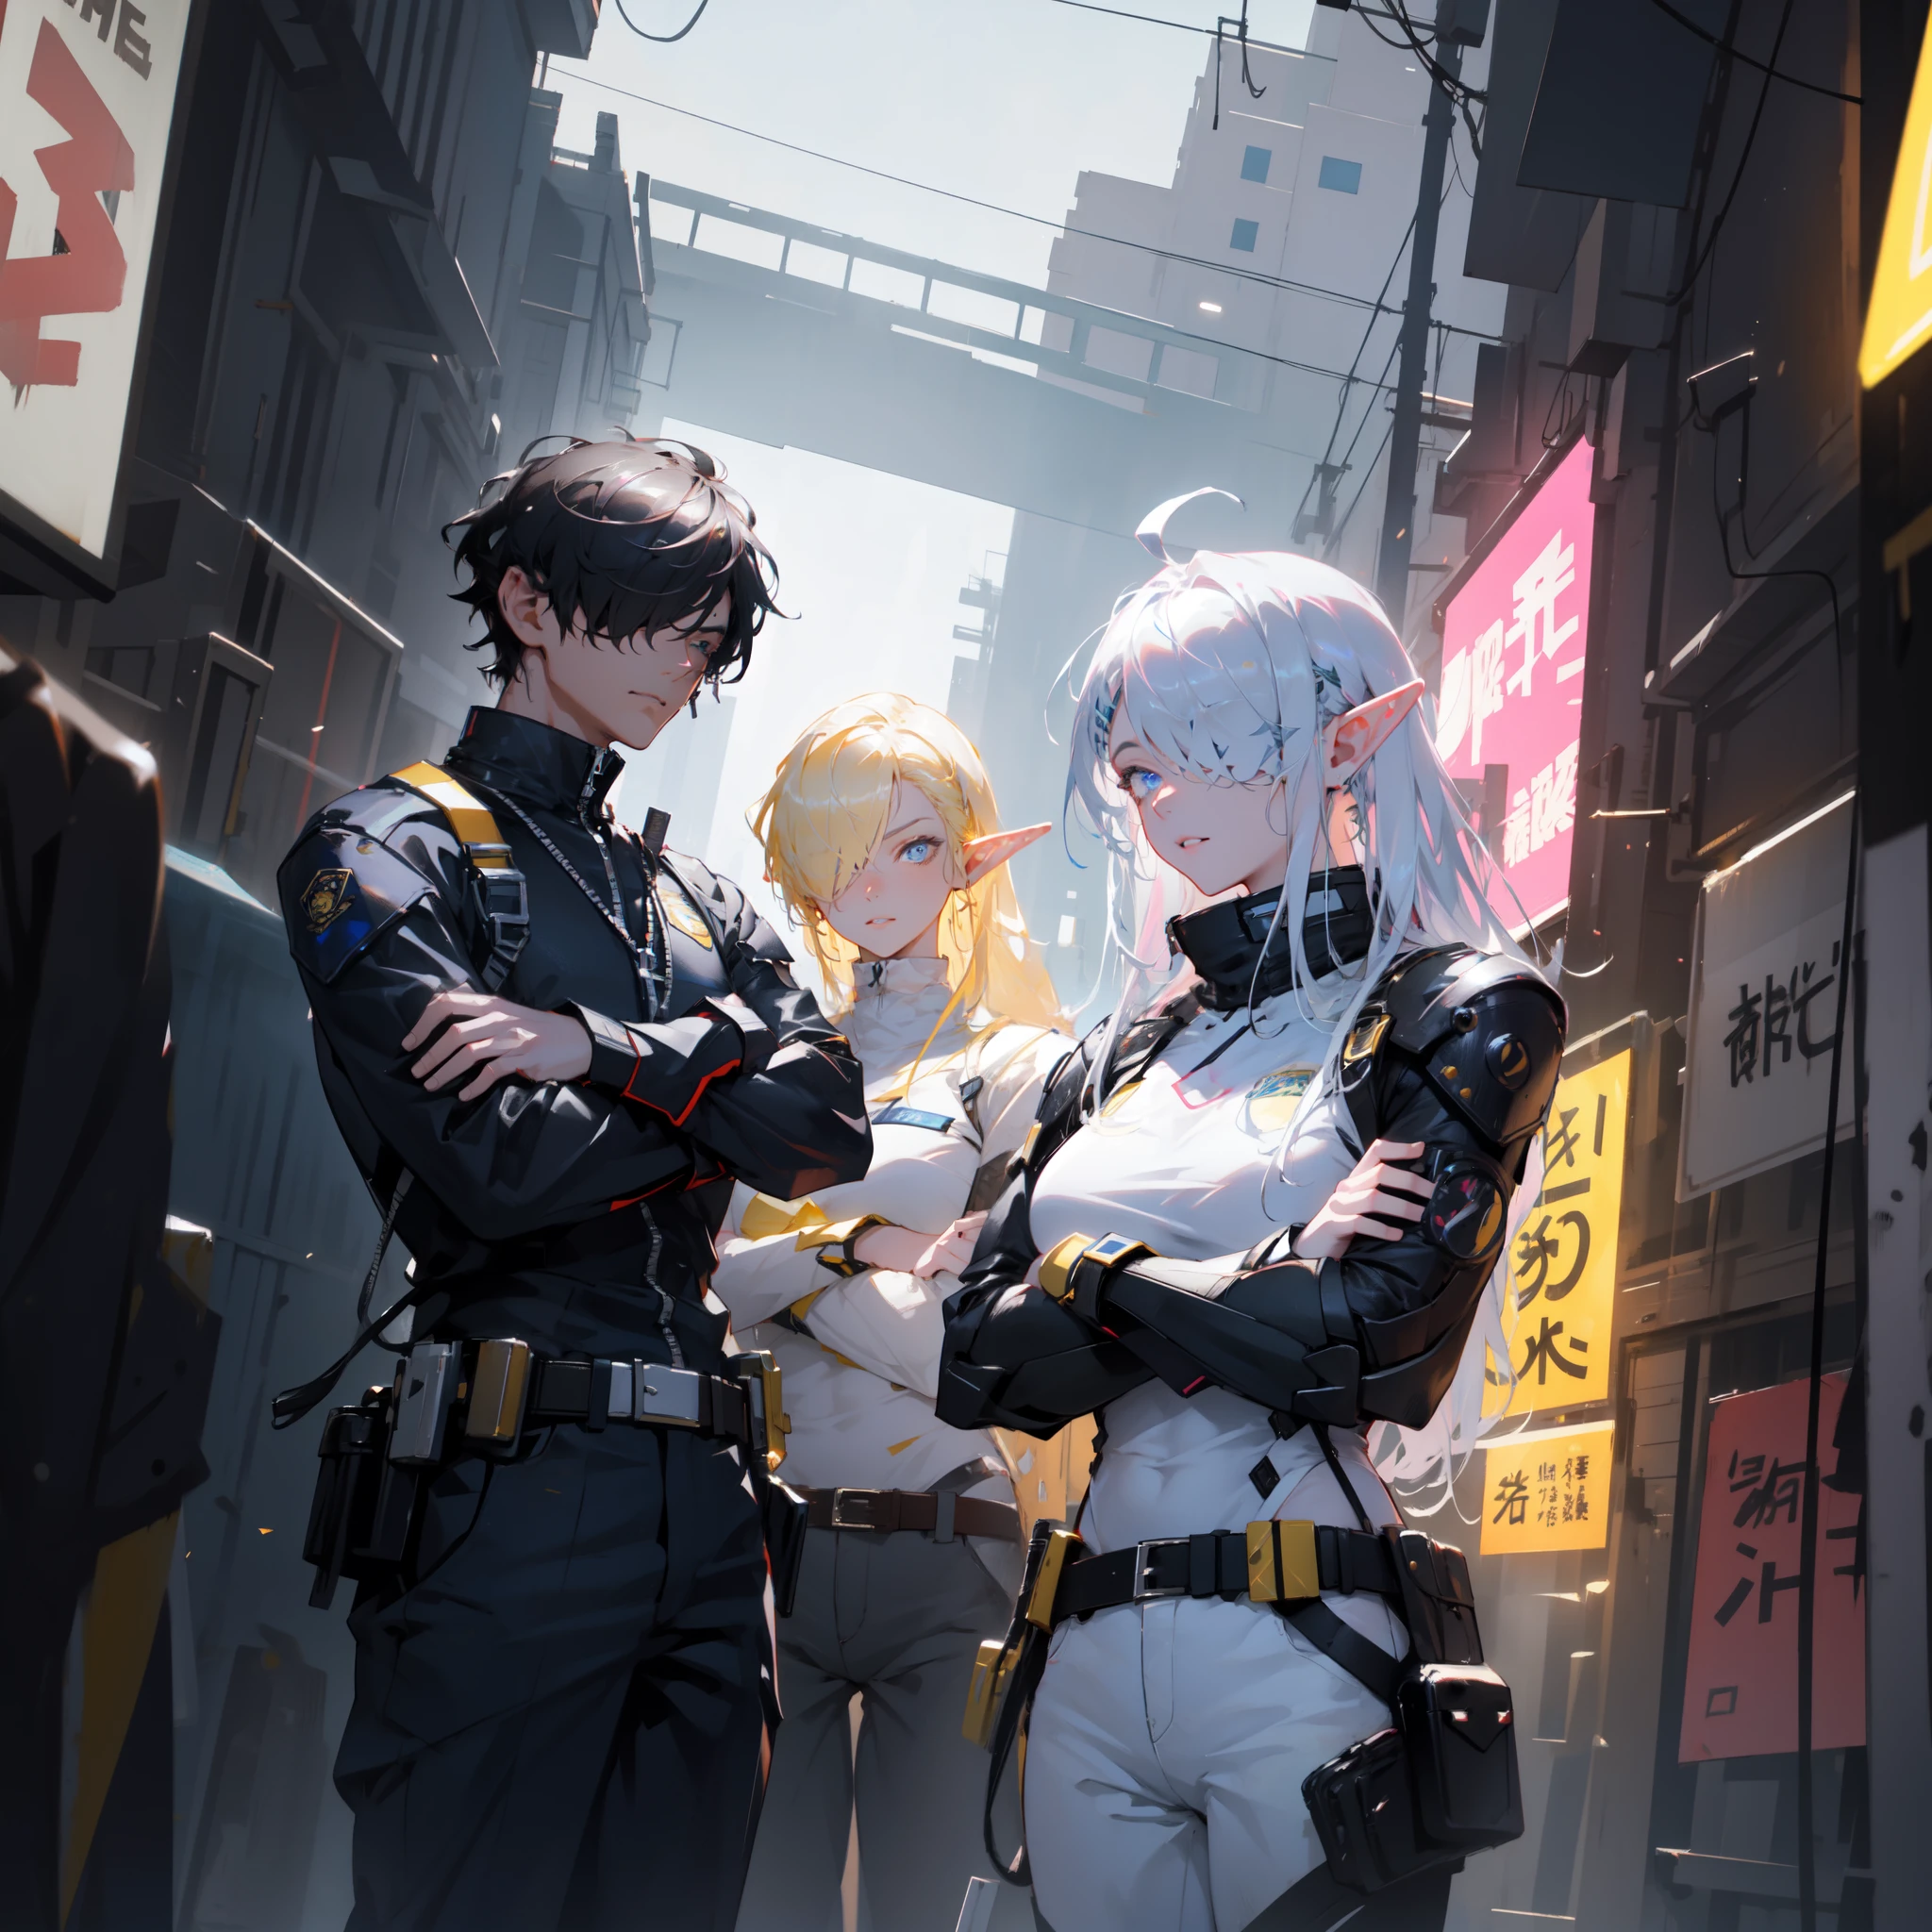 ((masterpiece)), (top quality), (best quality), ((ultra-detailed, 8k quality)), Aesthetics, Cinematic lighting, (detailed line art), absurdres, (best composition), (high-resolution),
BREAK,
Beauty of a elf girl, mecha girl, tech wear police uniform organic cyborg, white plastic, yellow techwear clothing, yellow and black safety tapes, full armor, Detailed Cloth, and armored Texture, She is major police in cyberpunkwith his squad, cyberpunk, cowboy shot, ((crossed arms:1.2)), fantasy, intricate, elegant, highly detailed, lifelike, photorealistic, digital painting, artstation, illustration, concept art, smooth, sharp focus, art by Yoji Shinkawa, by Mikimoto Haruhiko, by Artgerm,
BREAK,
highly detailed of (elf), (1girl), solo, perfect face, details eye, ahoge, ((long hair:1.2)), (hair over one eye:1.3), [[Messy hair]], shiny blonde white hair, blue eyes, multicolored hair, (eyelashes, eyeshadow, pink eyeshadow), smile, design art by Mikimoto Haruhiko, by Kawacy, By Yoshitaka Amano,
BREAK, 
((perfect anatomy)), perfect body, Abs, medium breast, best hands, perfect face, beautiful face, beautiful eyes, perfect eyes, (perfect fingers, deatailed fingers), correct anatomy, 
BREAK, 
Watercolor wash painting, muted colors, warm colors, best quality, delicate brushwork,painting style background, abandoned building, neon-lit cyberpunk cityscape, industrial, cables and pipes, ventilation ducts, crowded police squad, (depth of field:1.2), (blurry background:1.2),the style of Mikimoto Haruhiko, Artgerm, Kentaro Miura style, the style of Mikimoto Haruhiko, Artgerm, Kentaro Miura style,